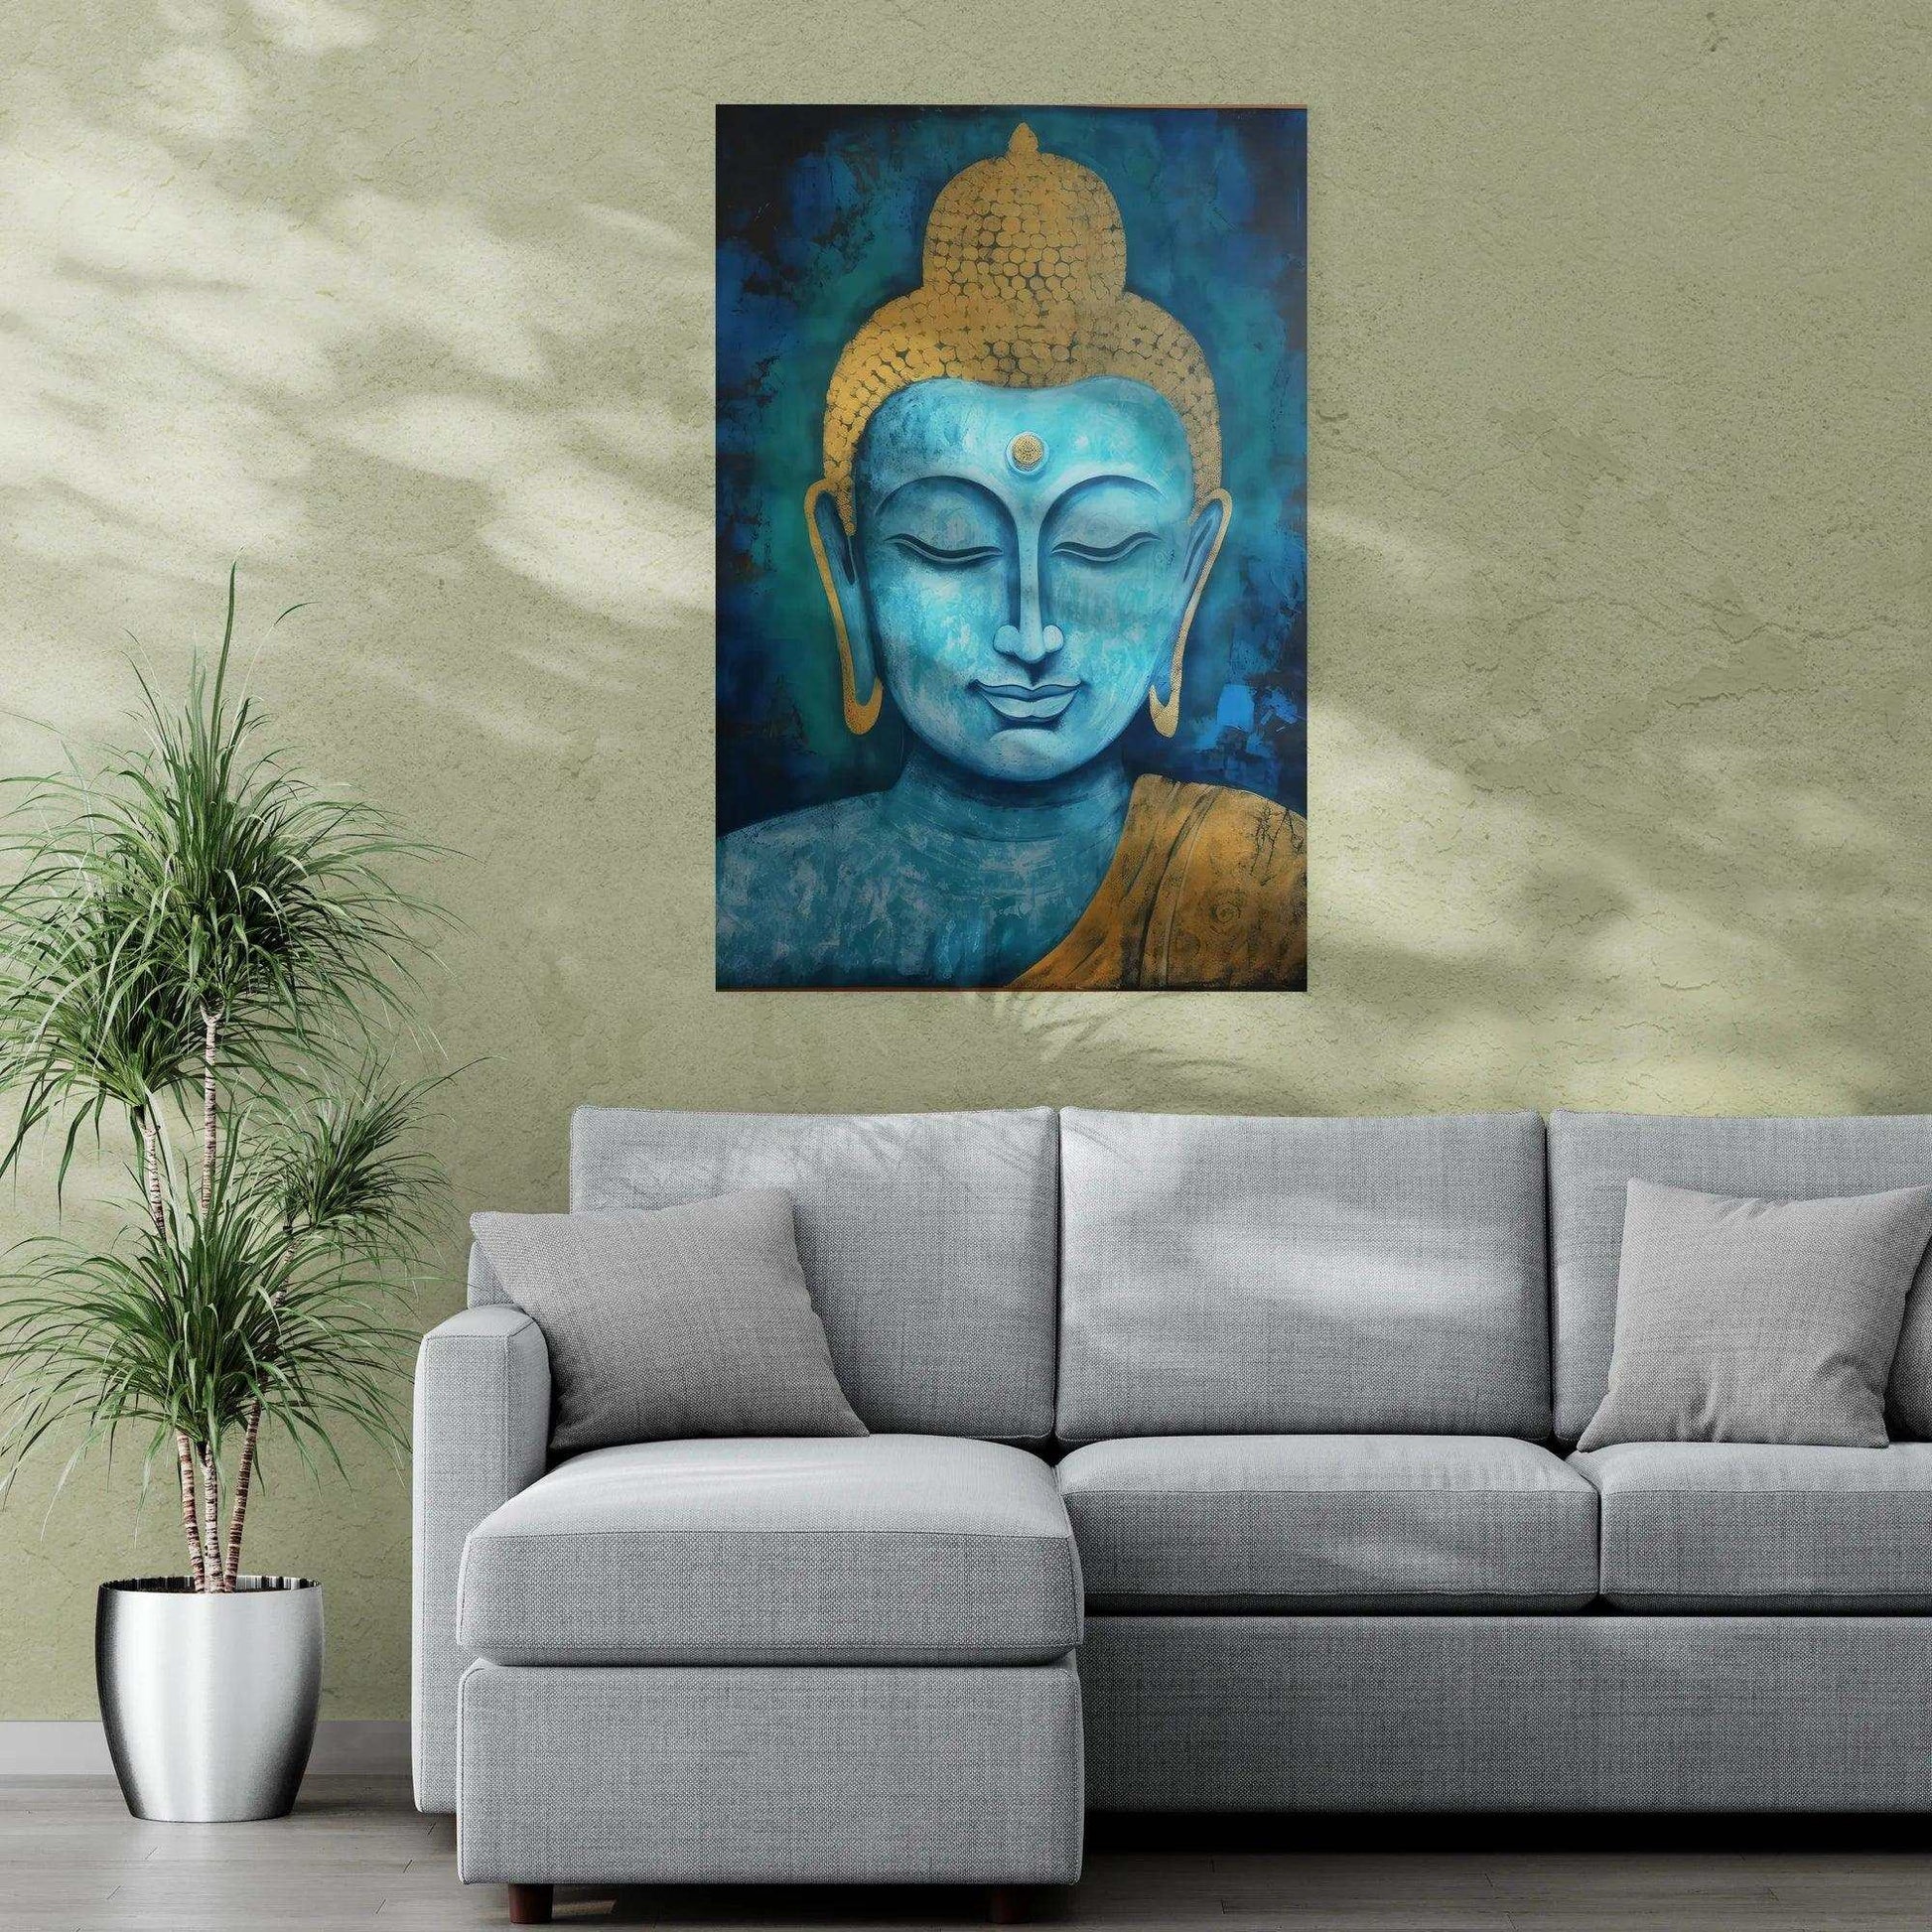 A vibrant Buddha portrait with blue and gold tones creates a focal point above a modern light gray sectional sofa, with a tall green potted plant adding a touch of natural vitality to the soothing and stylish living space.